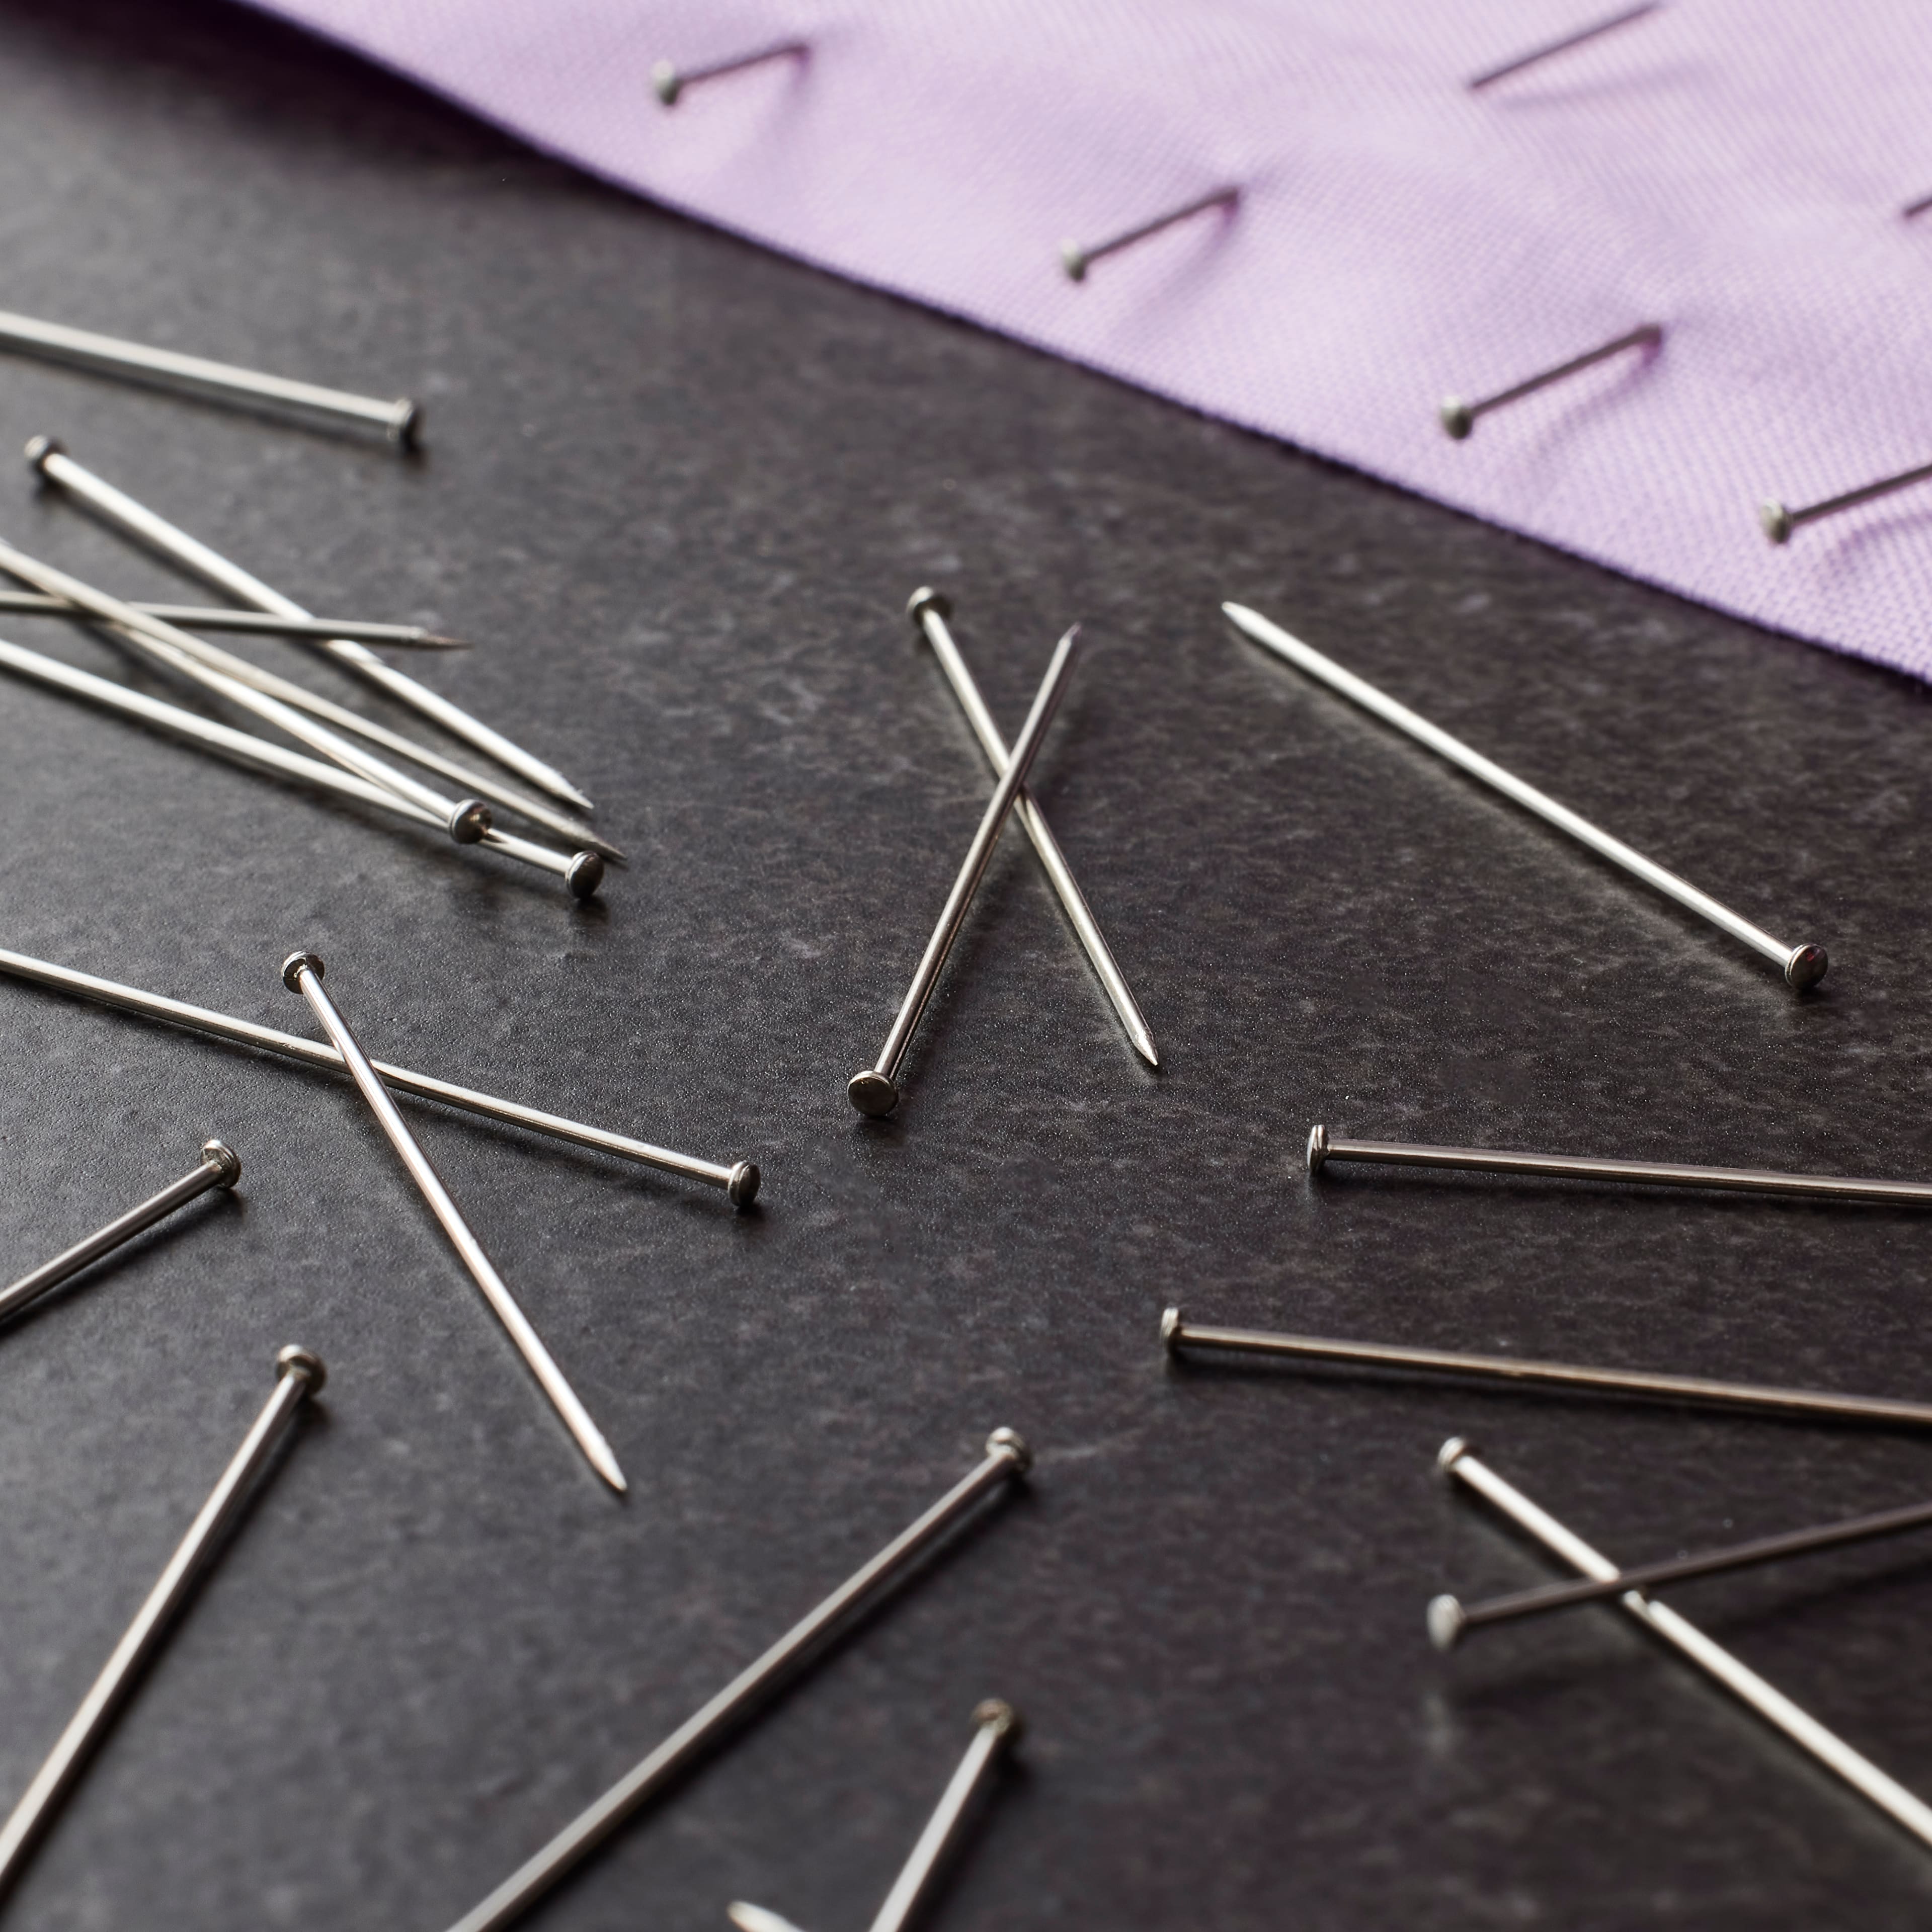 12 Packs: 350 ct. (4,200 total) 1.25 Dressmaker Pins by Loops & Threads™ 